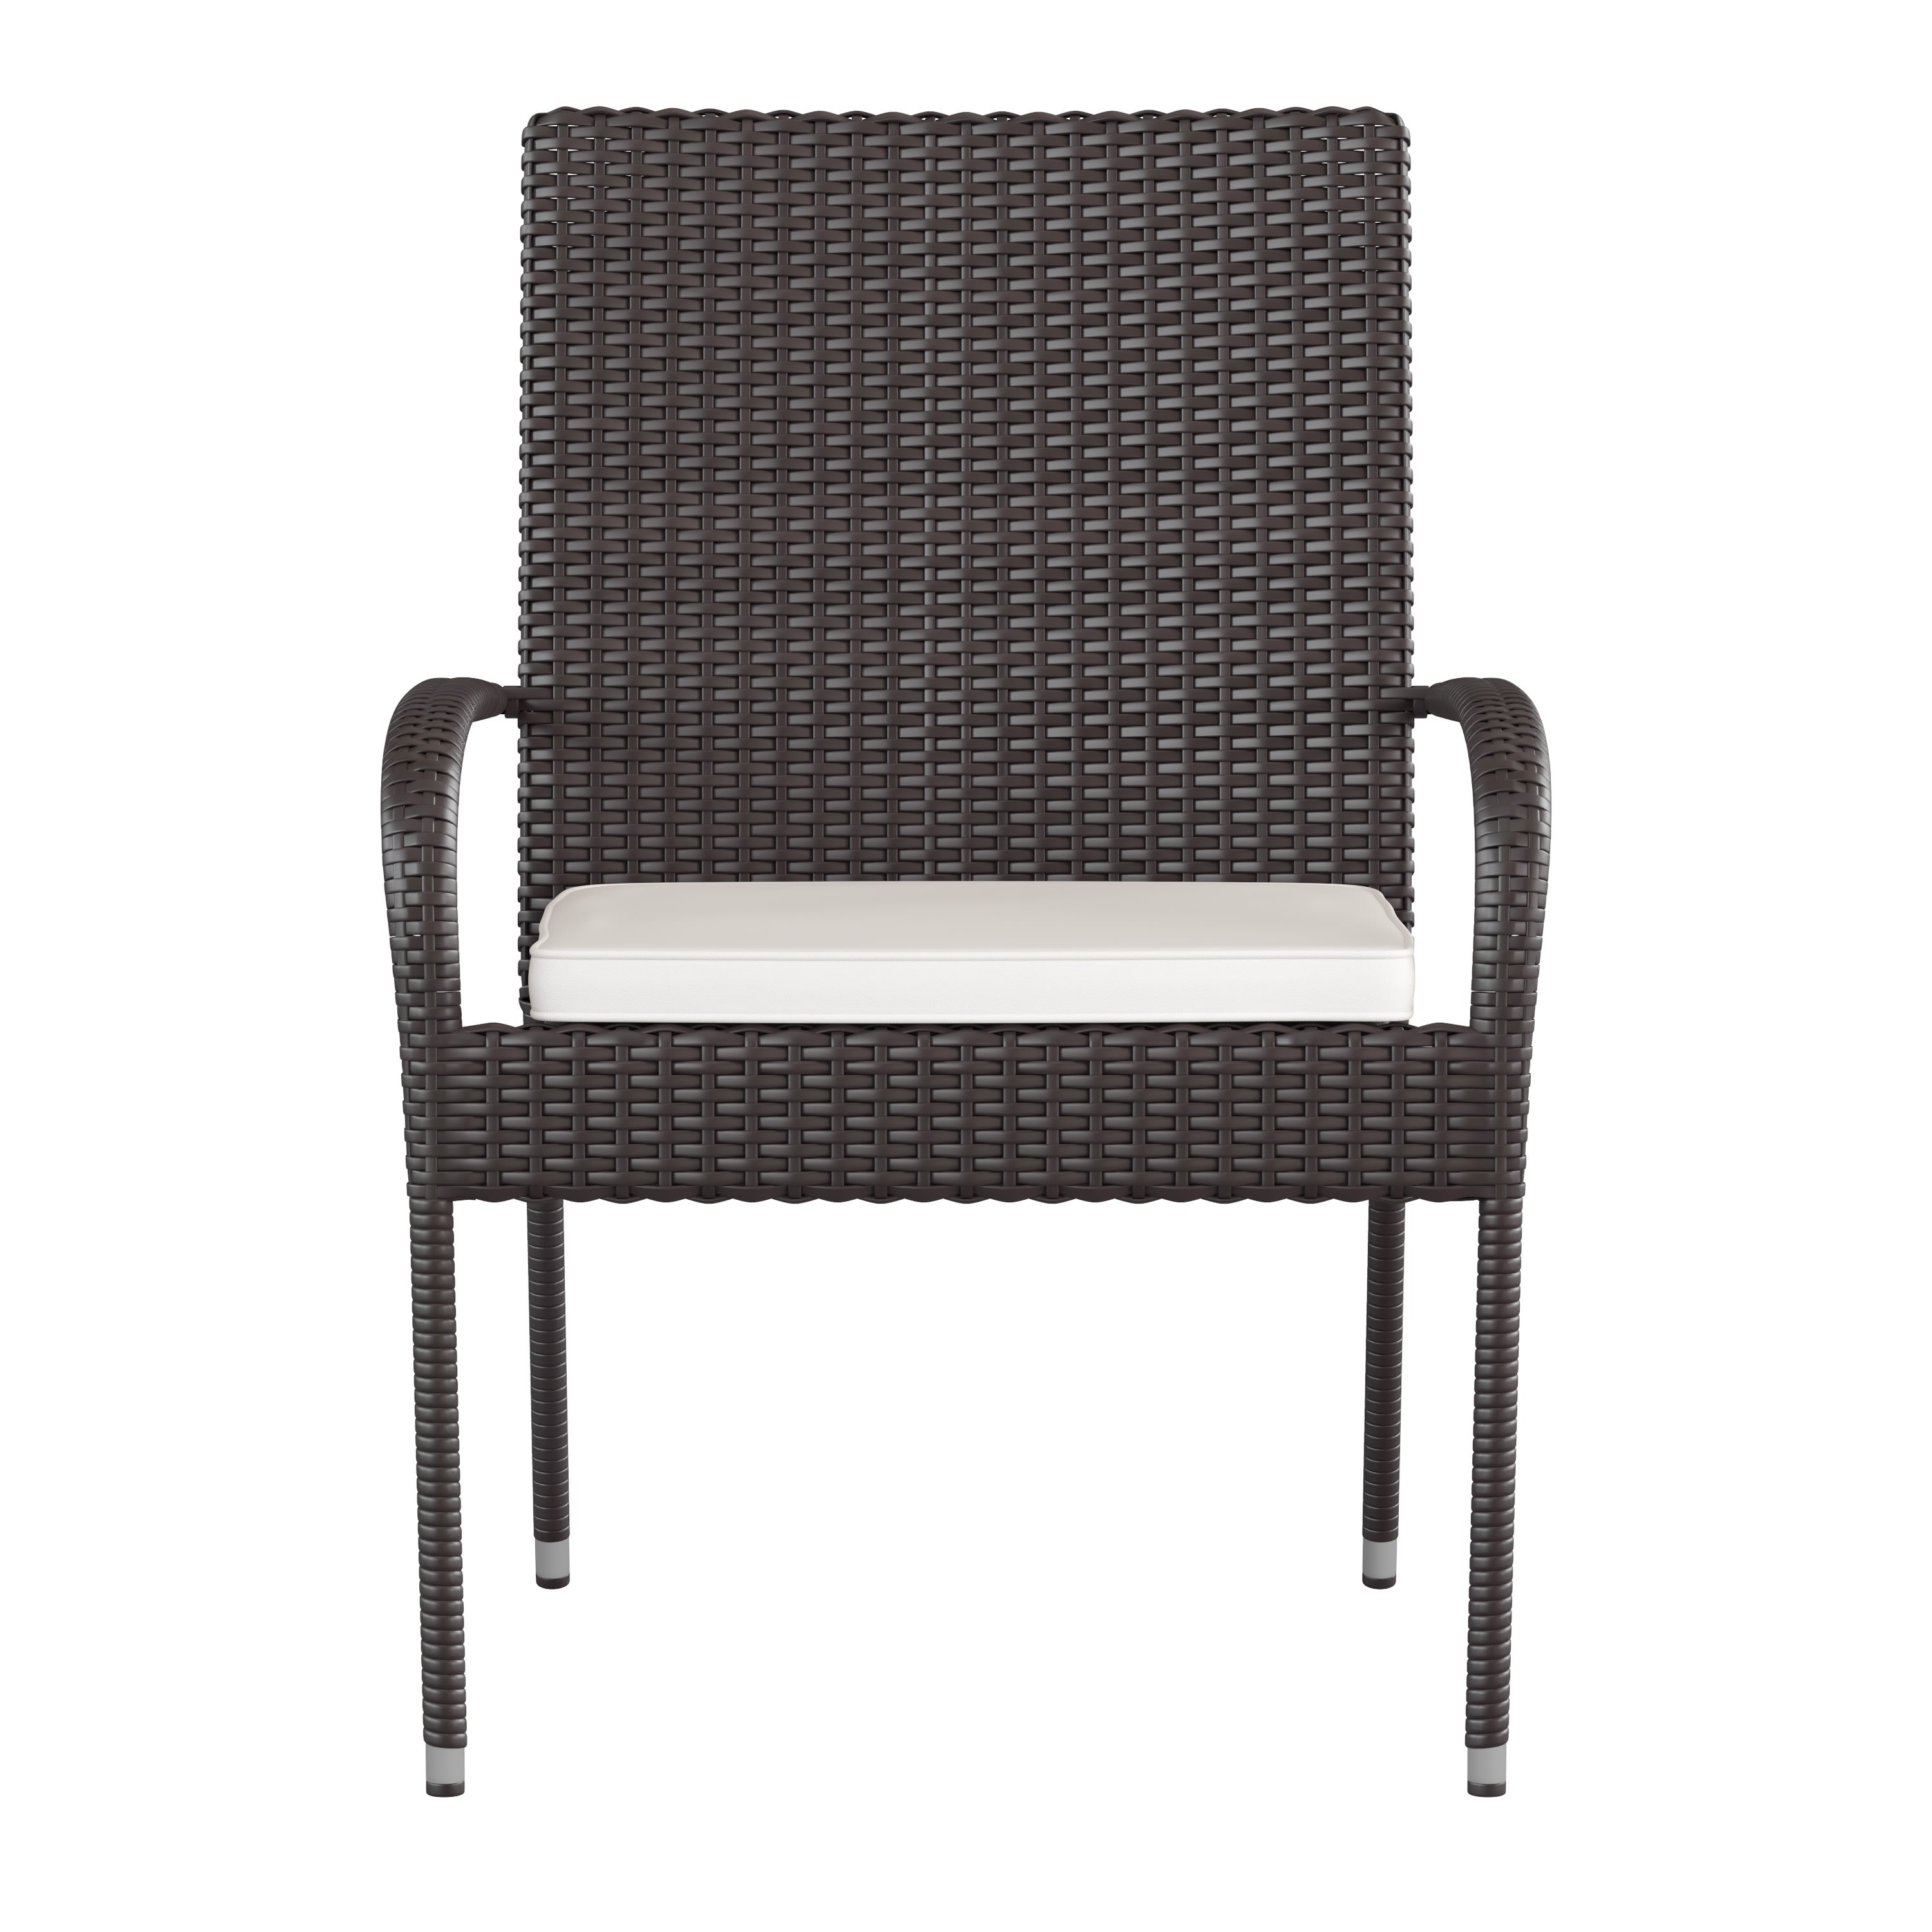 Maxim Set of 2 Stackable Indoor/Outdoor Wicker Dining Chairs with 1.25